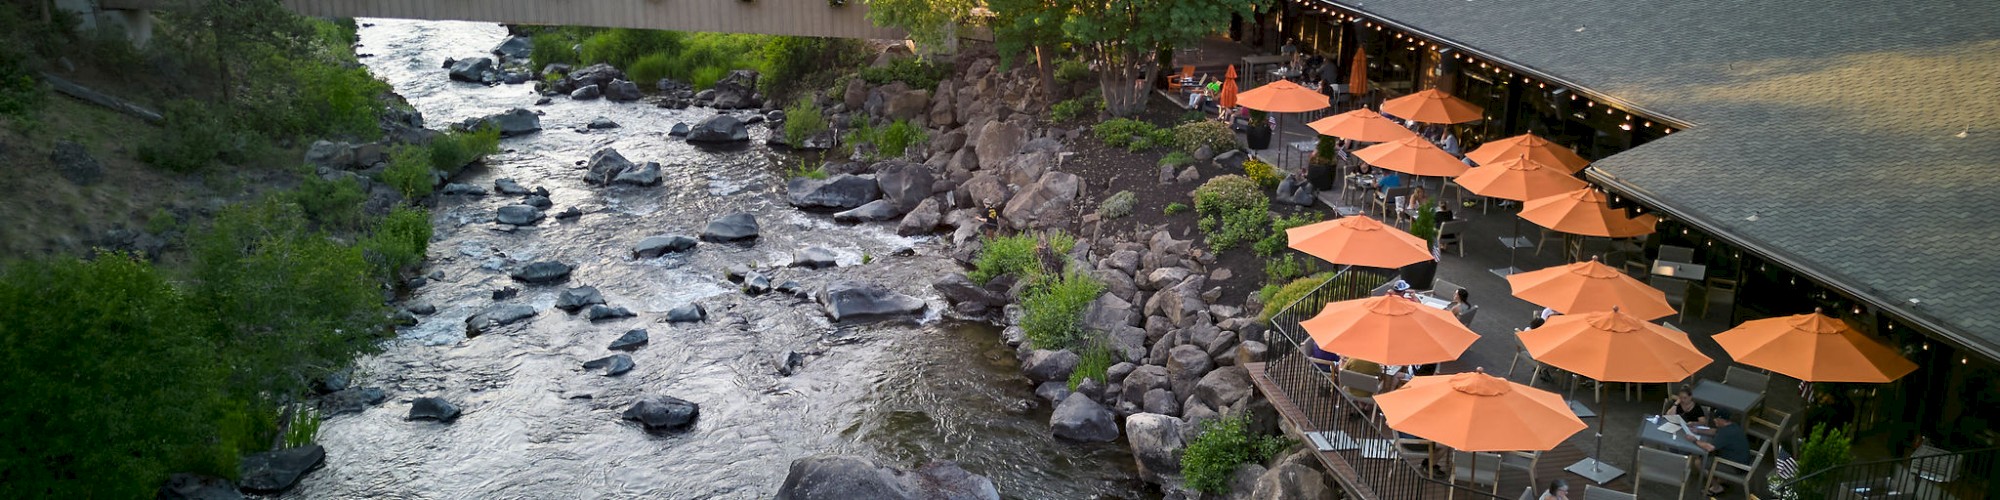 Aerial view of a river with rocks, a terrace with orange umbrellas, and Currents at Riverhouse in Bend, Oregon amidst trees.